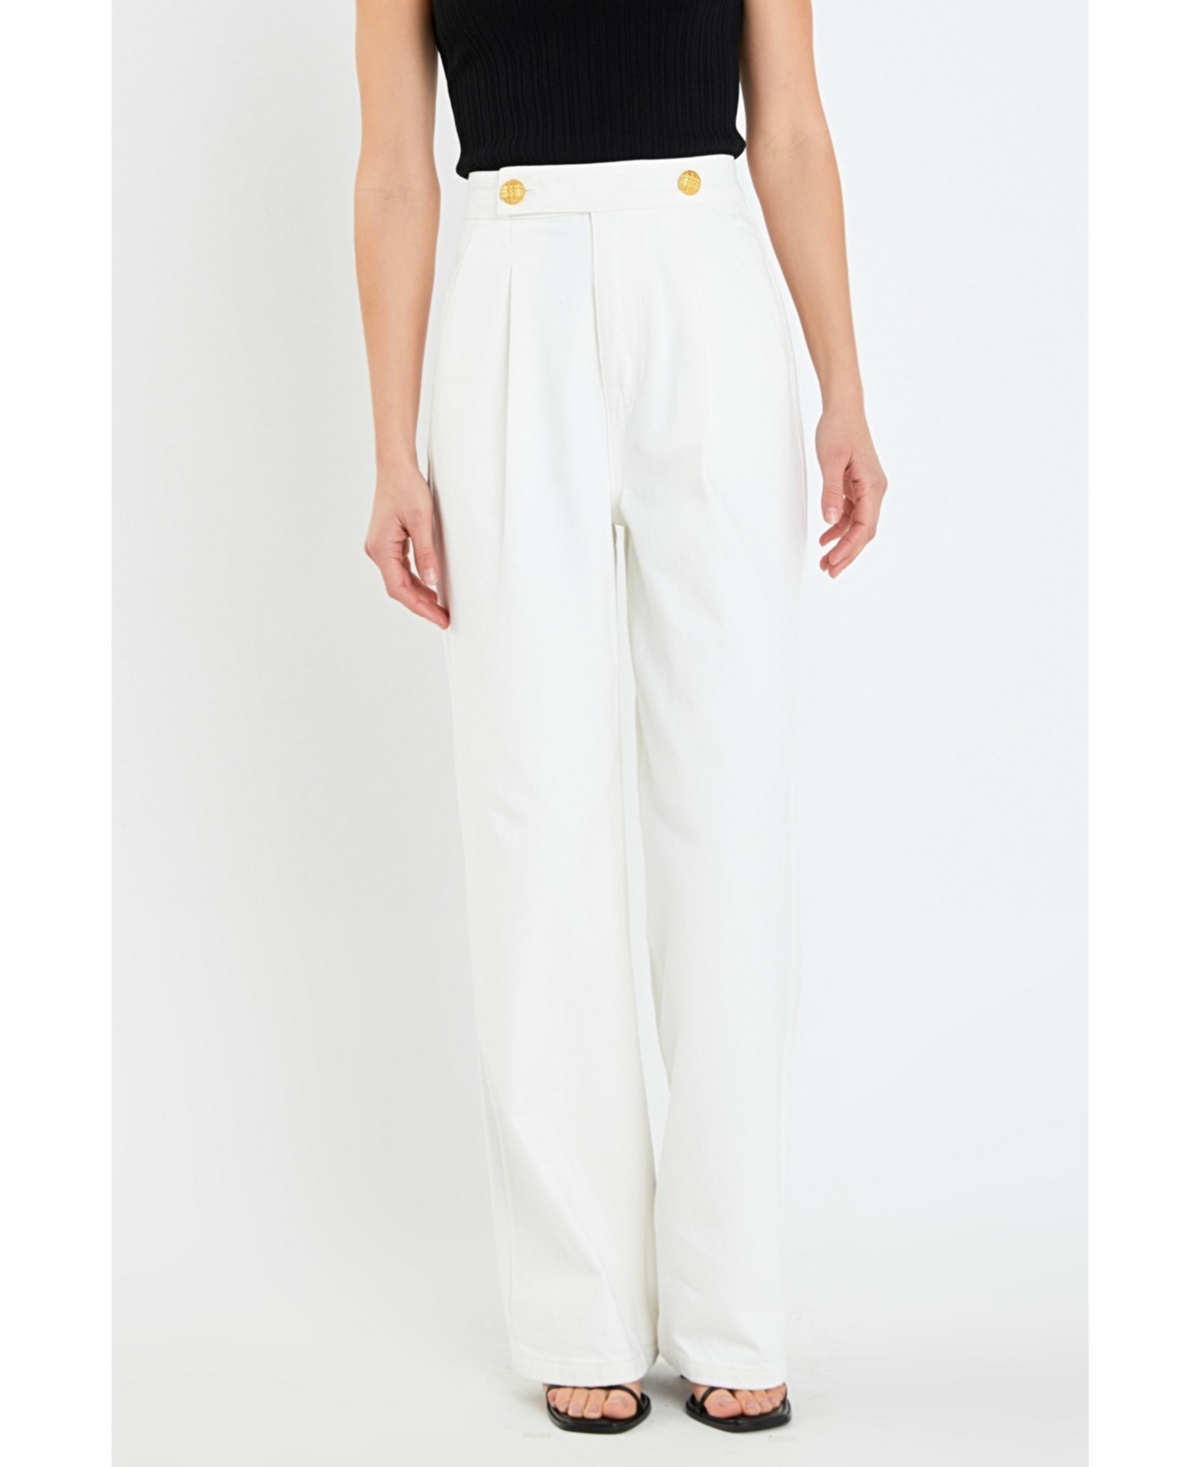 Women's High-Waisted Button Detail Jeans - Off white